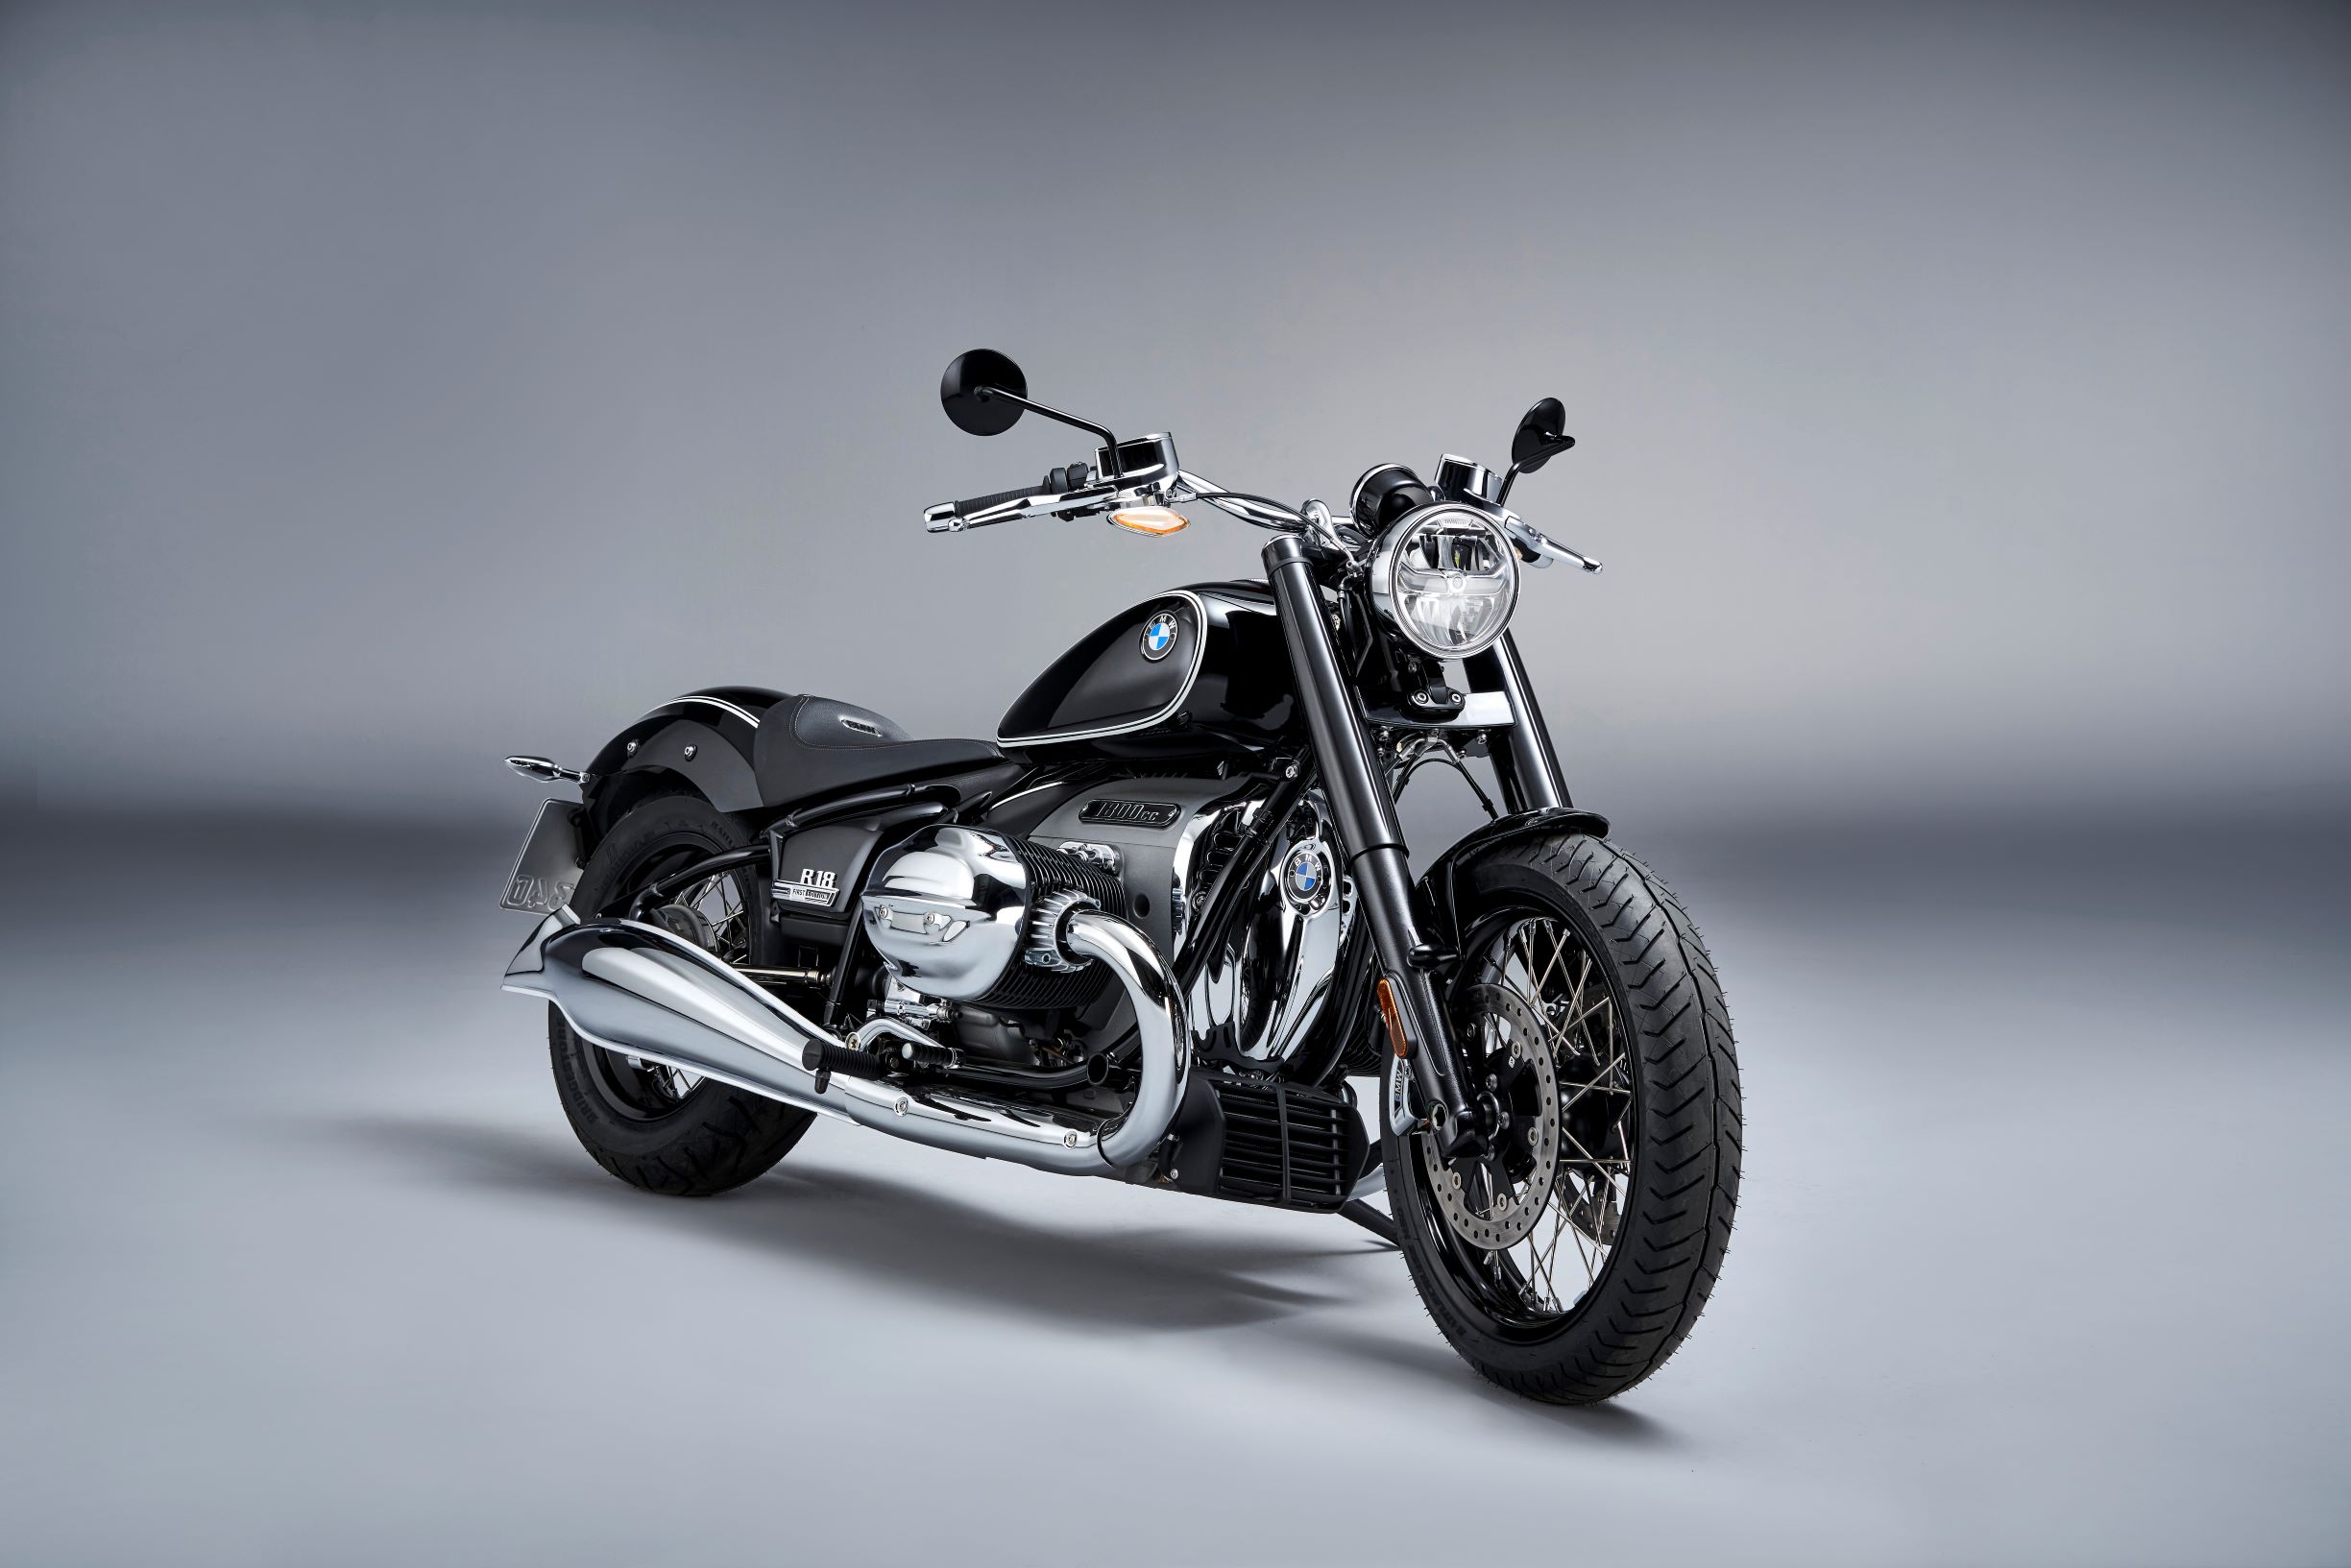 The all-new BMW R18's two-cylinder 